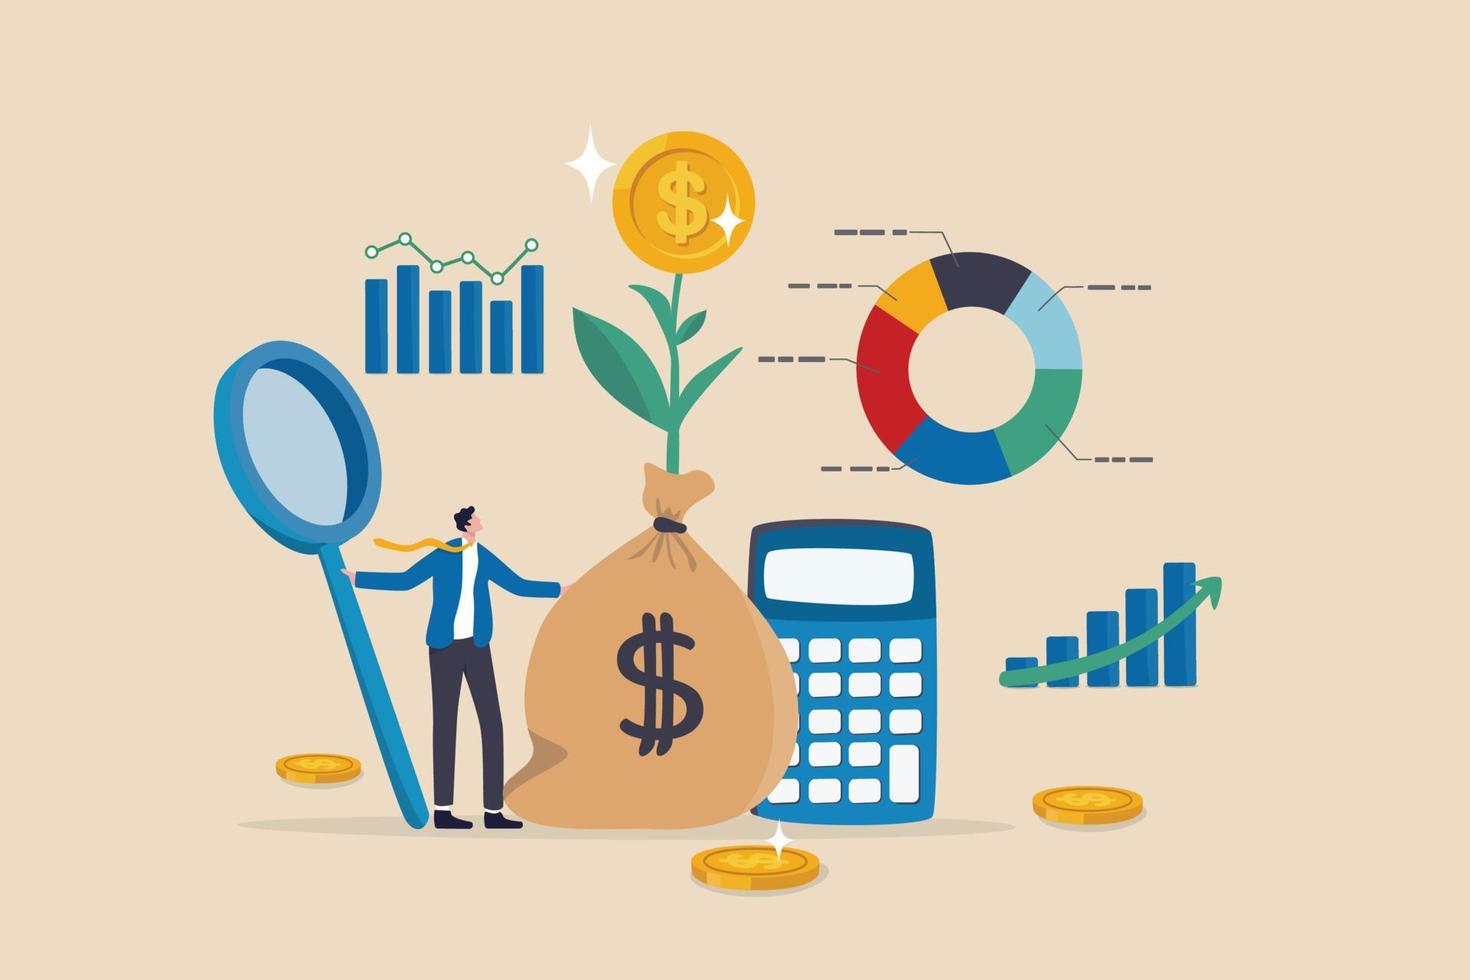 Financial management, planning and control financial resources to maximize profit and revenue, capital, credit and cash management concept, businessman analyze financial resource with growth profit. vector